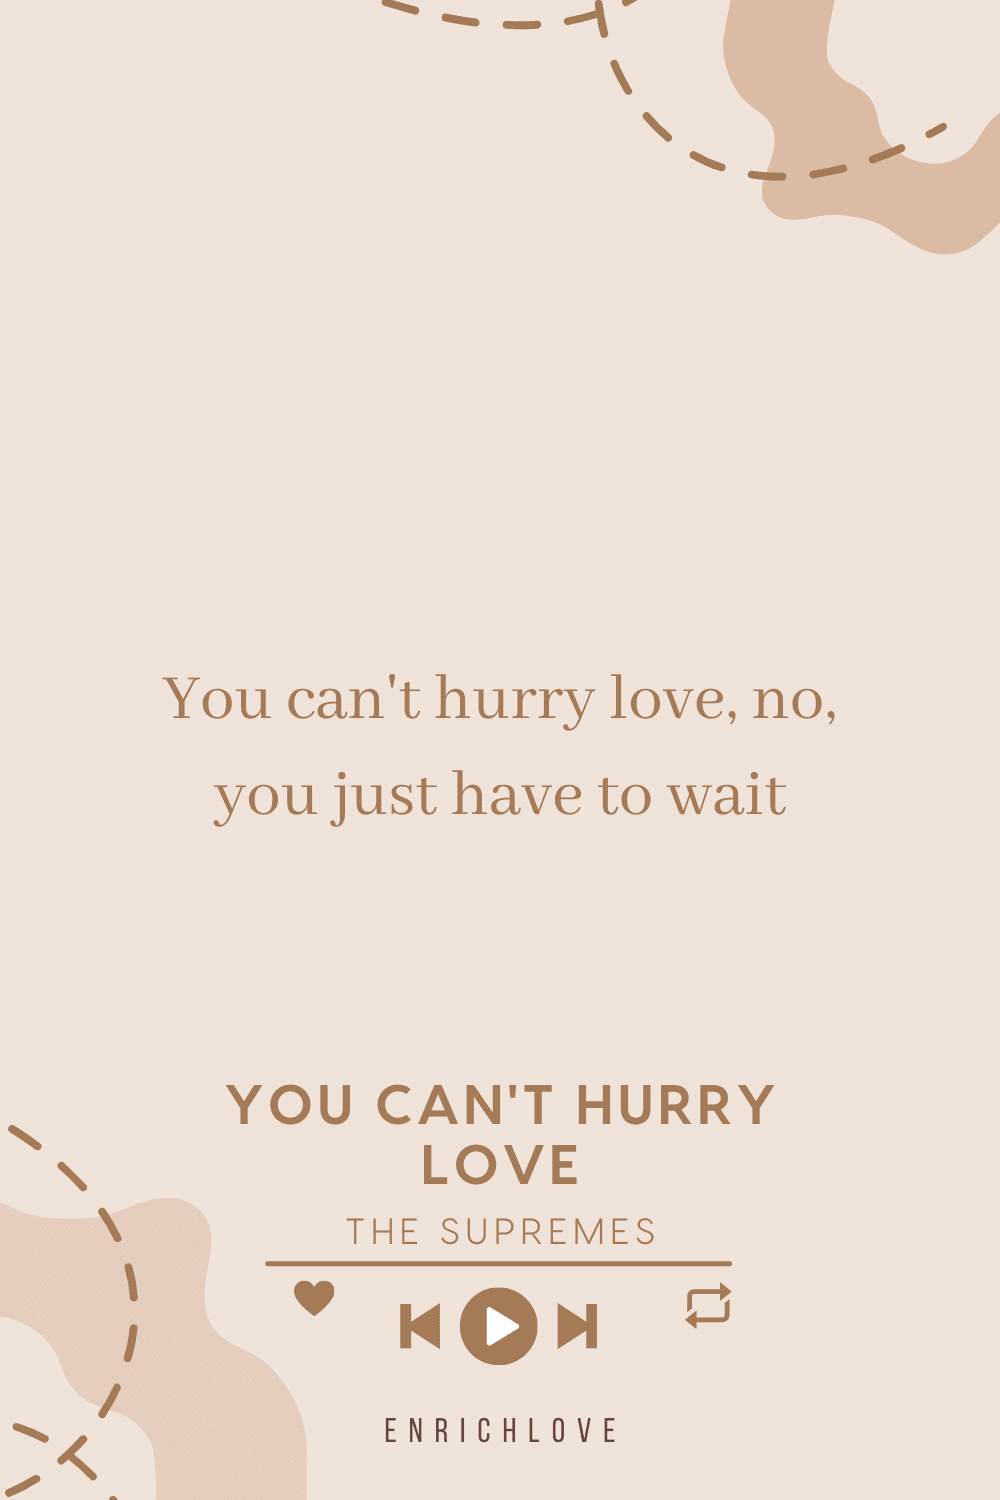 You can't hurry love, no, you just have to wait